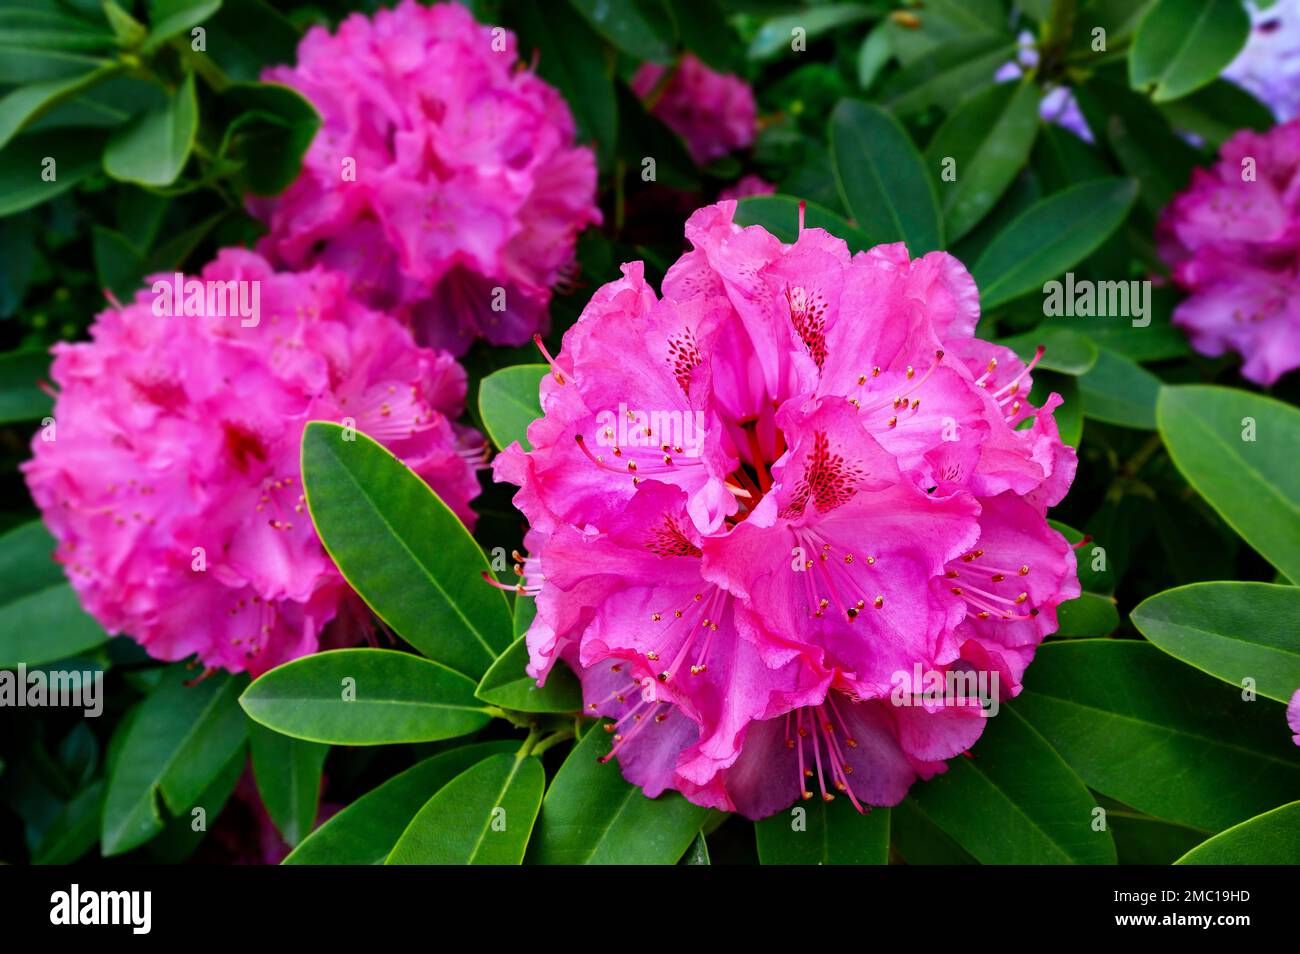 Flowers and leaves, rhododendrons (Rhododendron), Kempten, Allgaeu, Bavaria, Germany Stock Photo